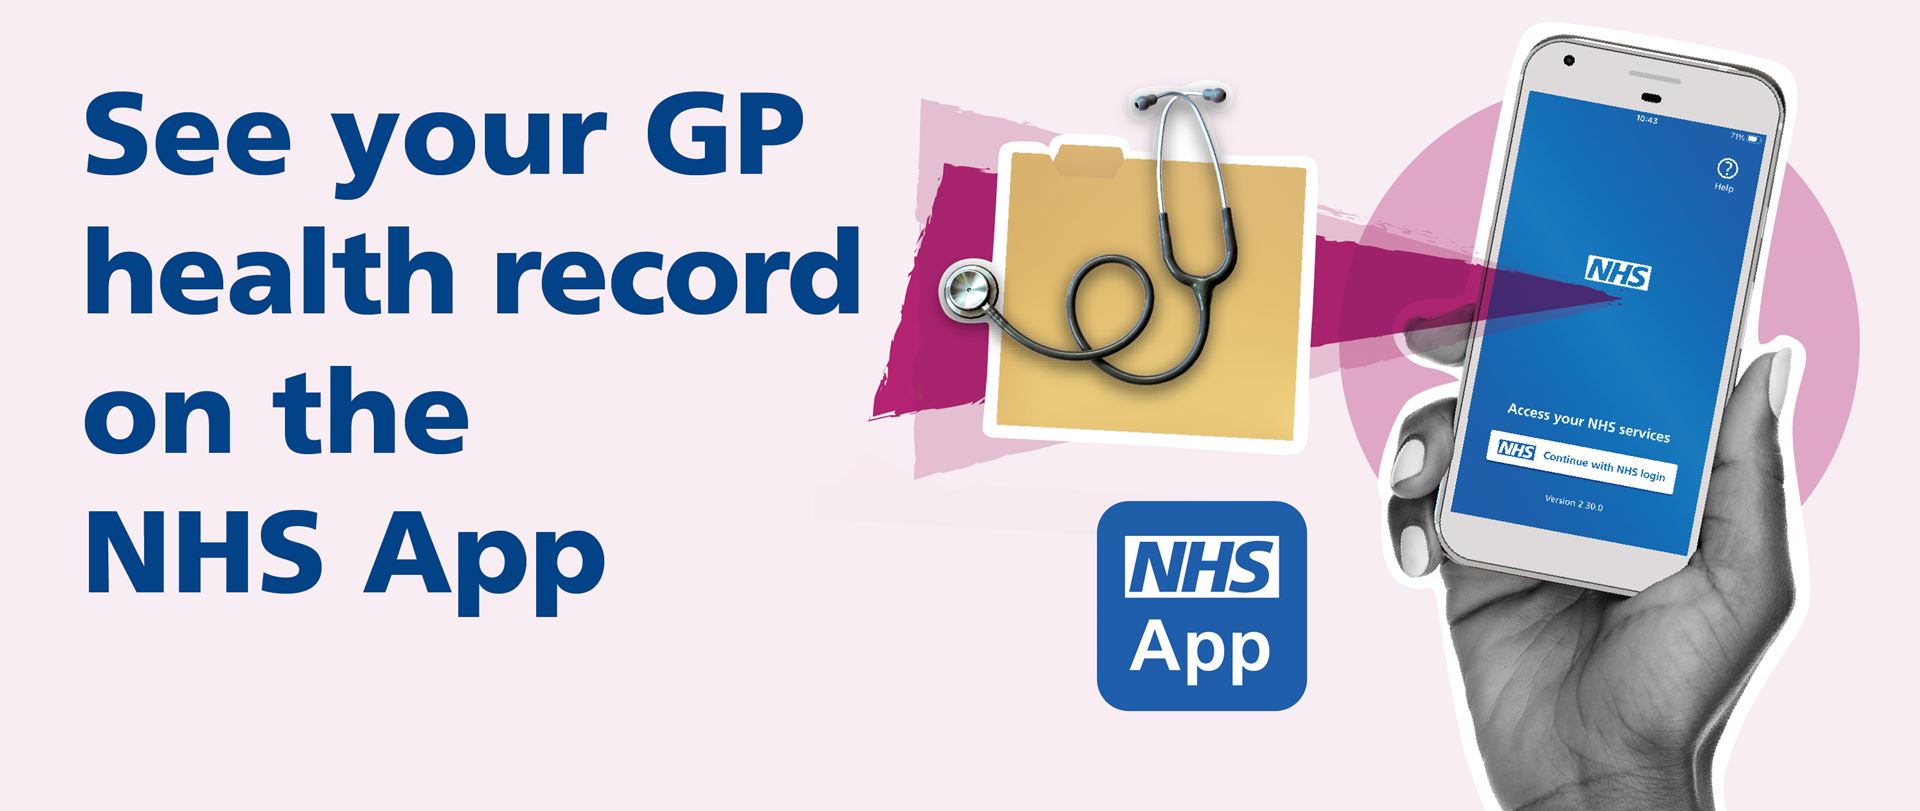 See your GP health record on the NHSApp